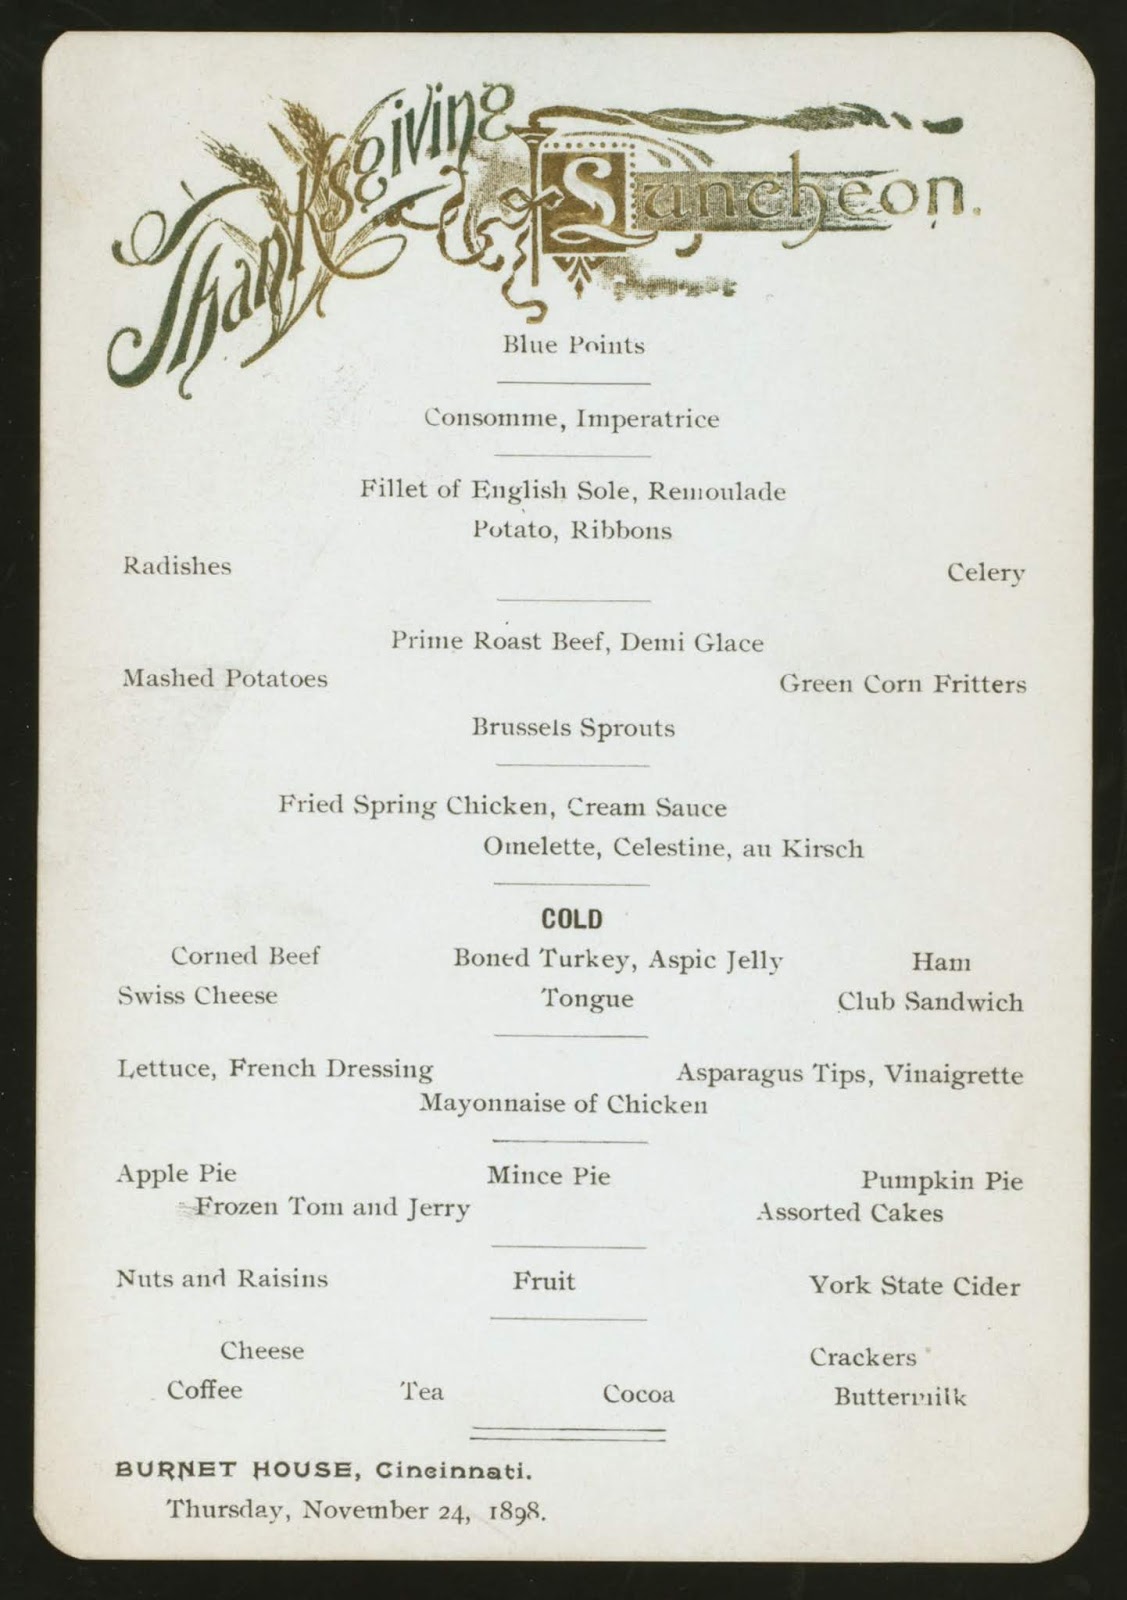 38 Vintage Thanksgiving Menus From the Late 19th Century ~ Vintage Everyday